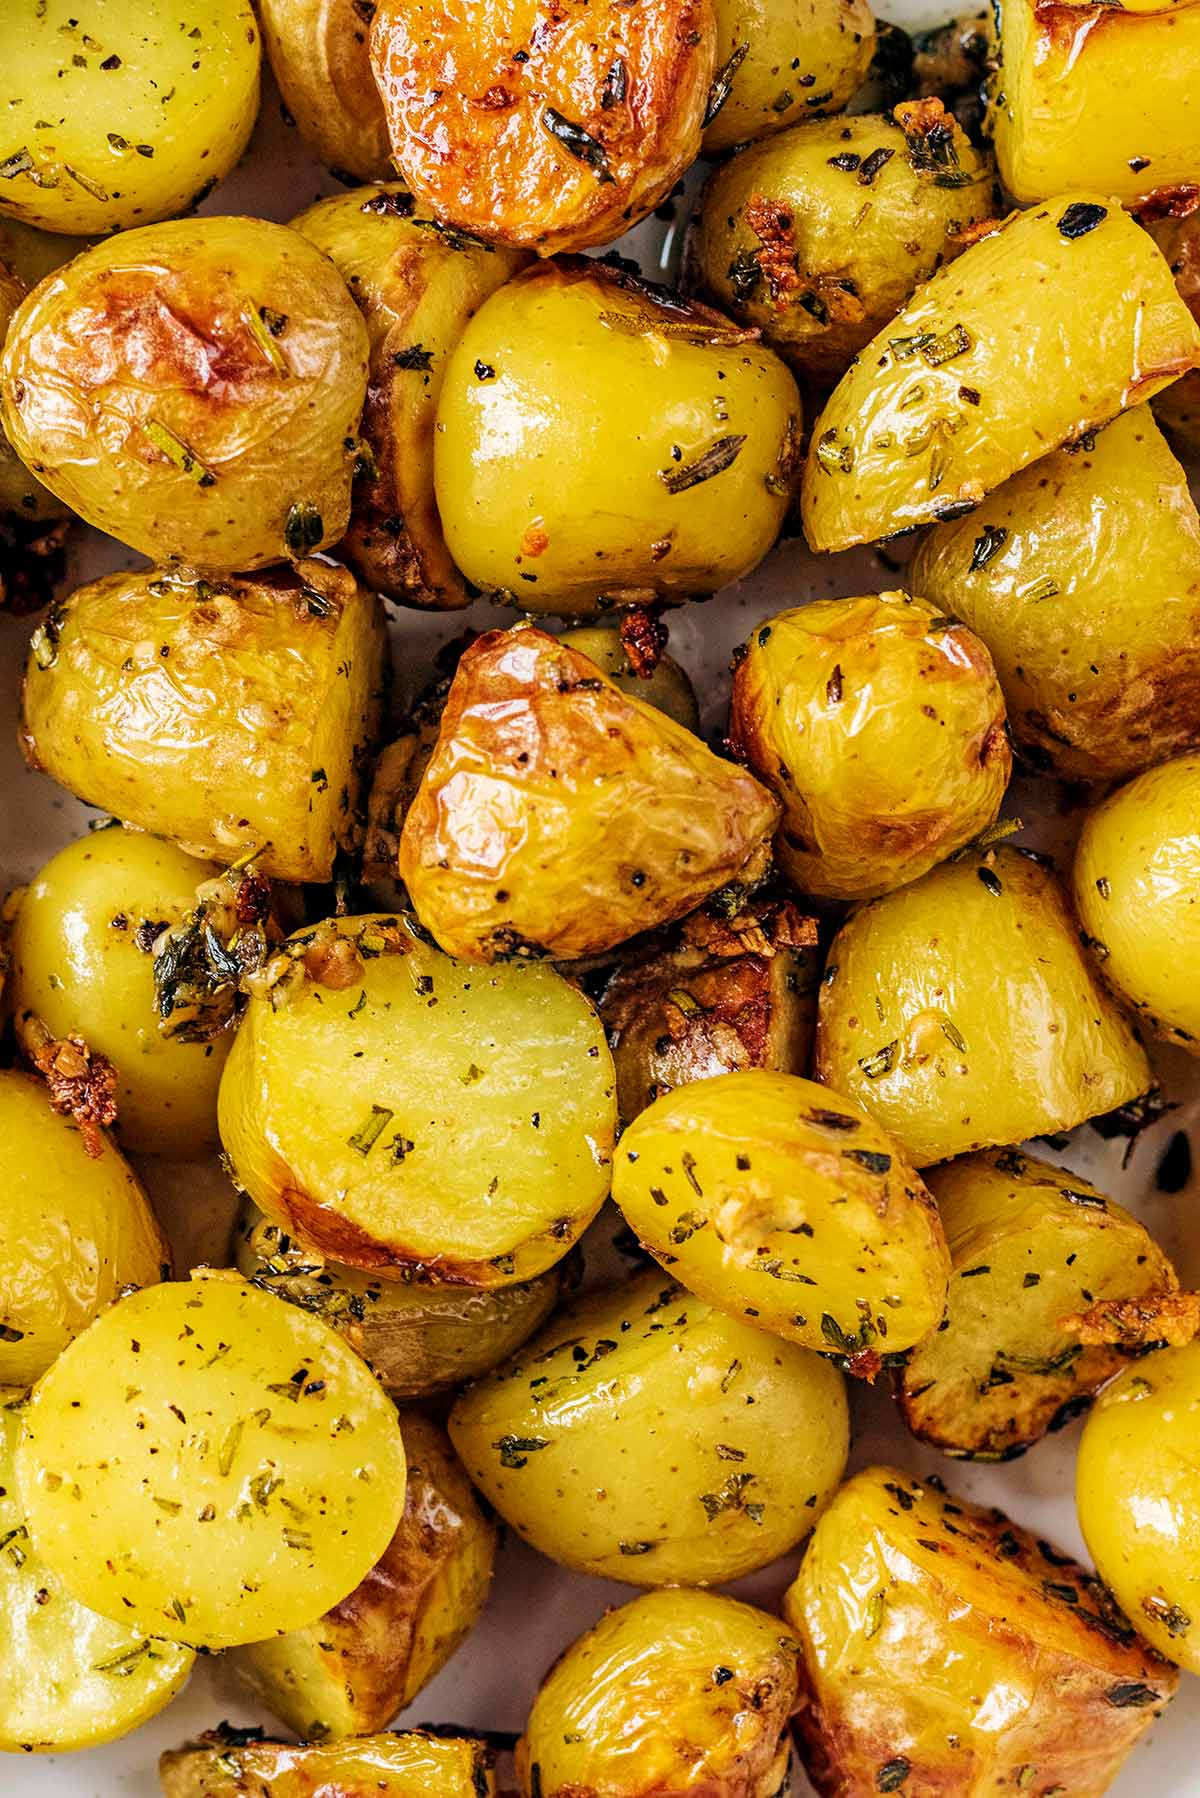 Roasted new potatoes coated in herbs and seasoning.